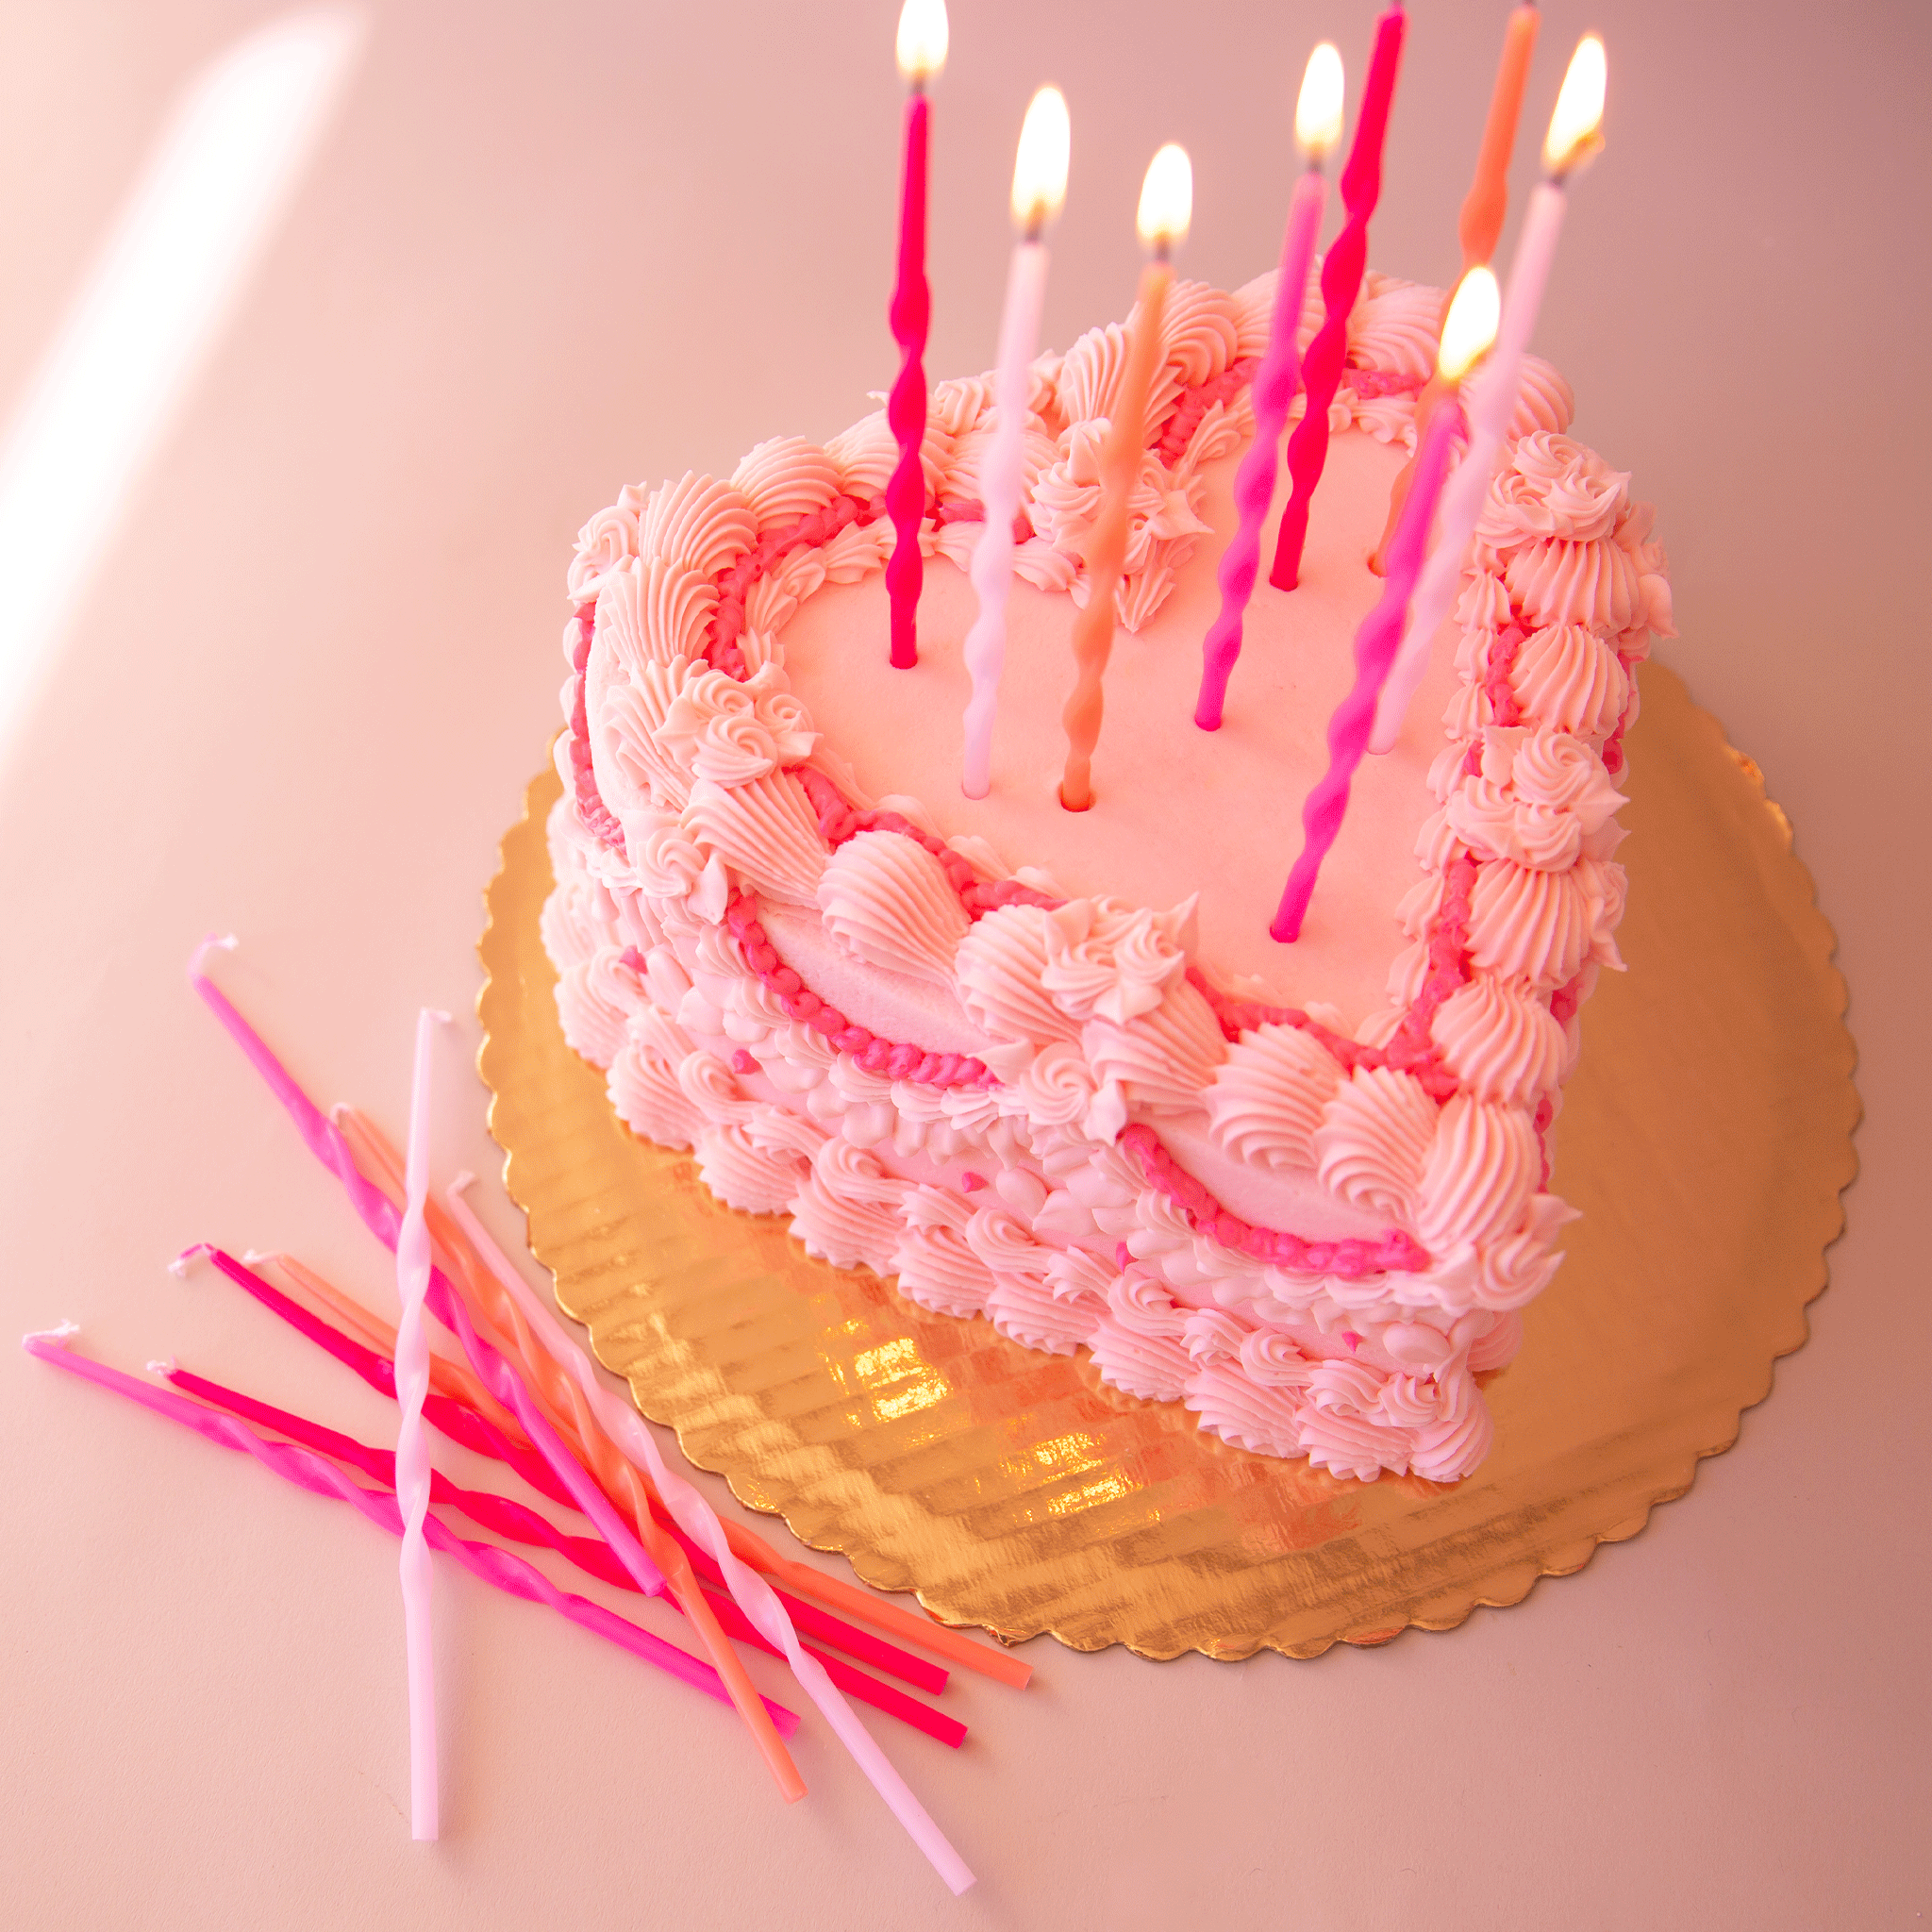 On a pink background and on a pink cake is a variety of long pink twisted candles. Cake and props not included with purchase. 